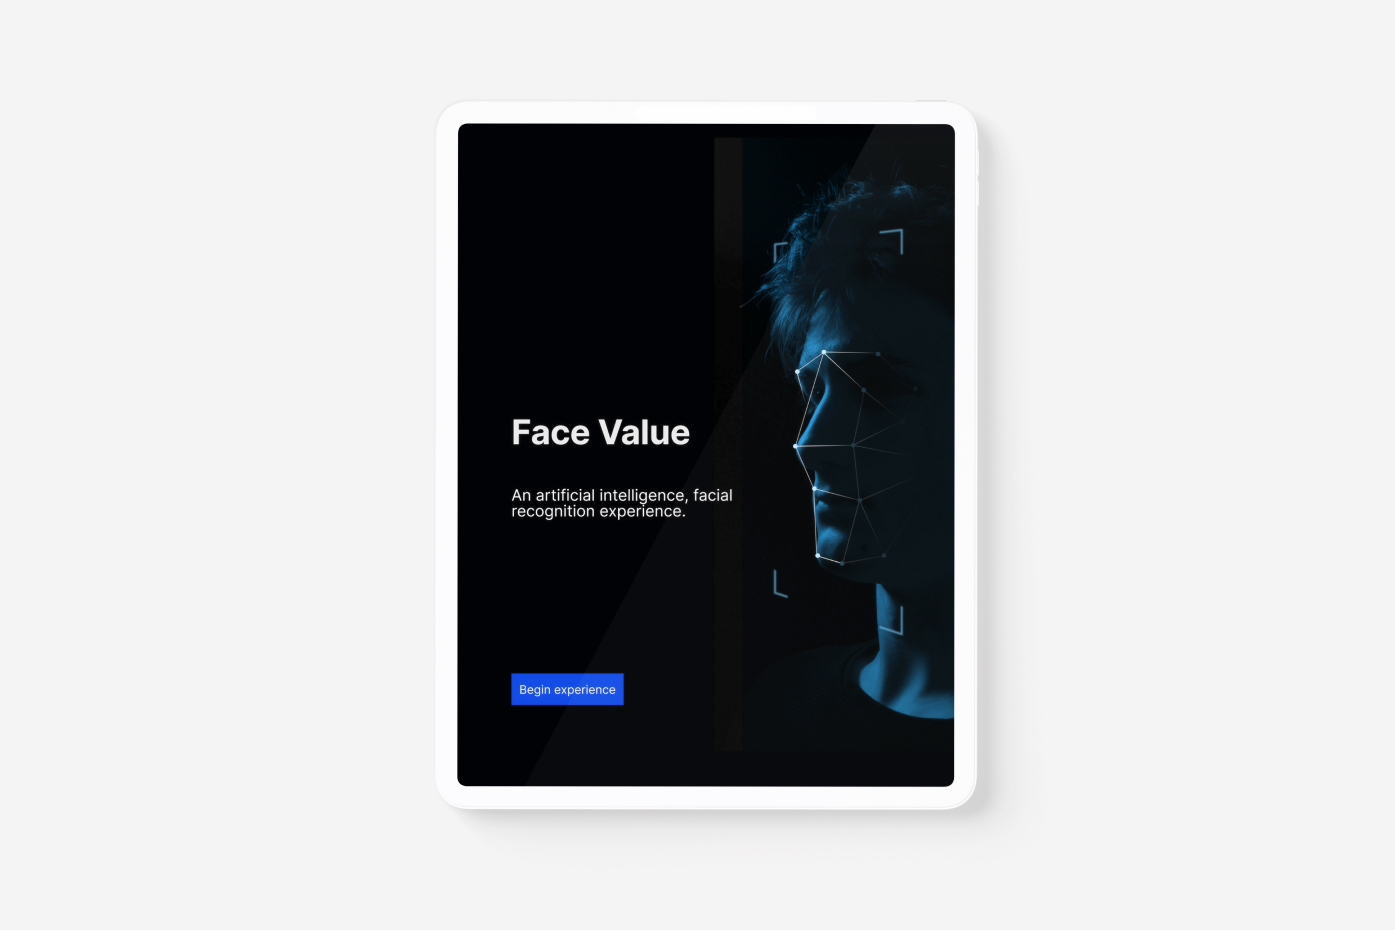 An image of the Face Value application's opening screen. The background shows a human face, with dots on key facial landmarks.